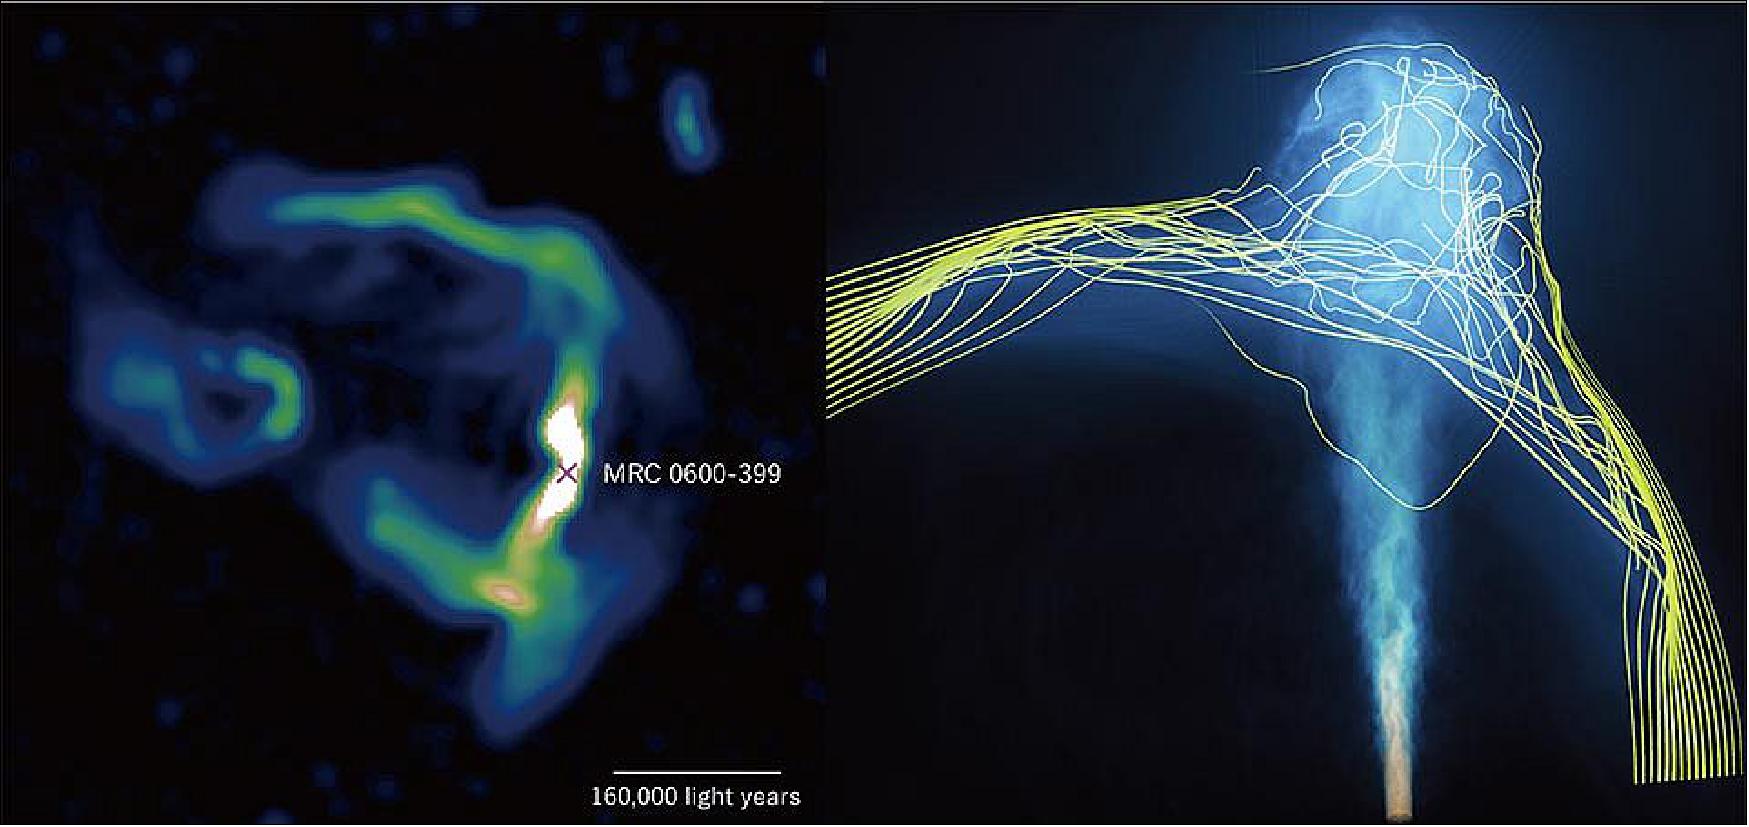 Figure 67: The bent jet structures emitted from MRC 0600-399 as observed by the MeerKAT radio telescope (left) are well reproduced by the simulation conducted on ATERUI II (right). The nearby galaxy B visible in the left part of the MeerKAT image is not affecting the jet and has been excluded in the simulation [image credit: Chibueze, Sakemi, Ohmura et al. (MeerKAT image); Takumi Ohmura, Mami Machida, Hirotaka Nakayama, 4D2U Project, NAOJ (ATERUI II image)]